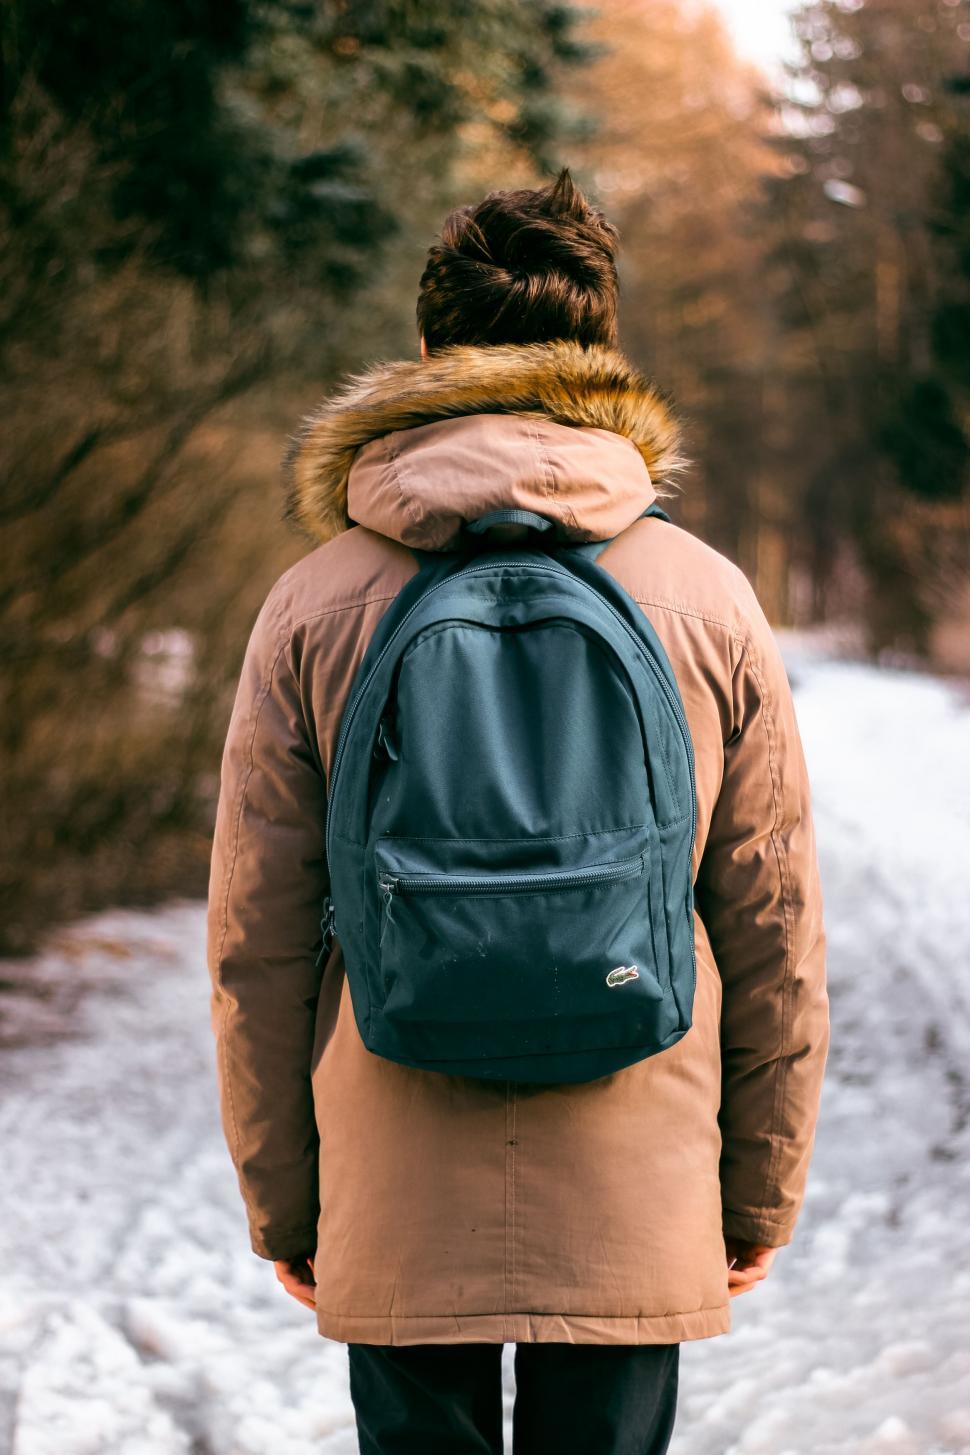 Free Image of Man in backpack and winter jacket  